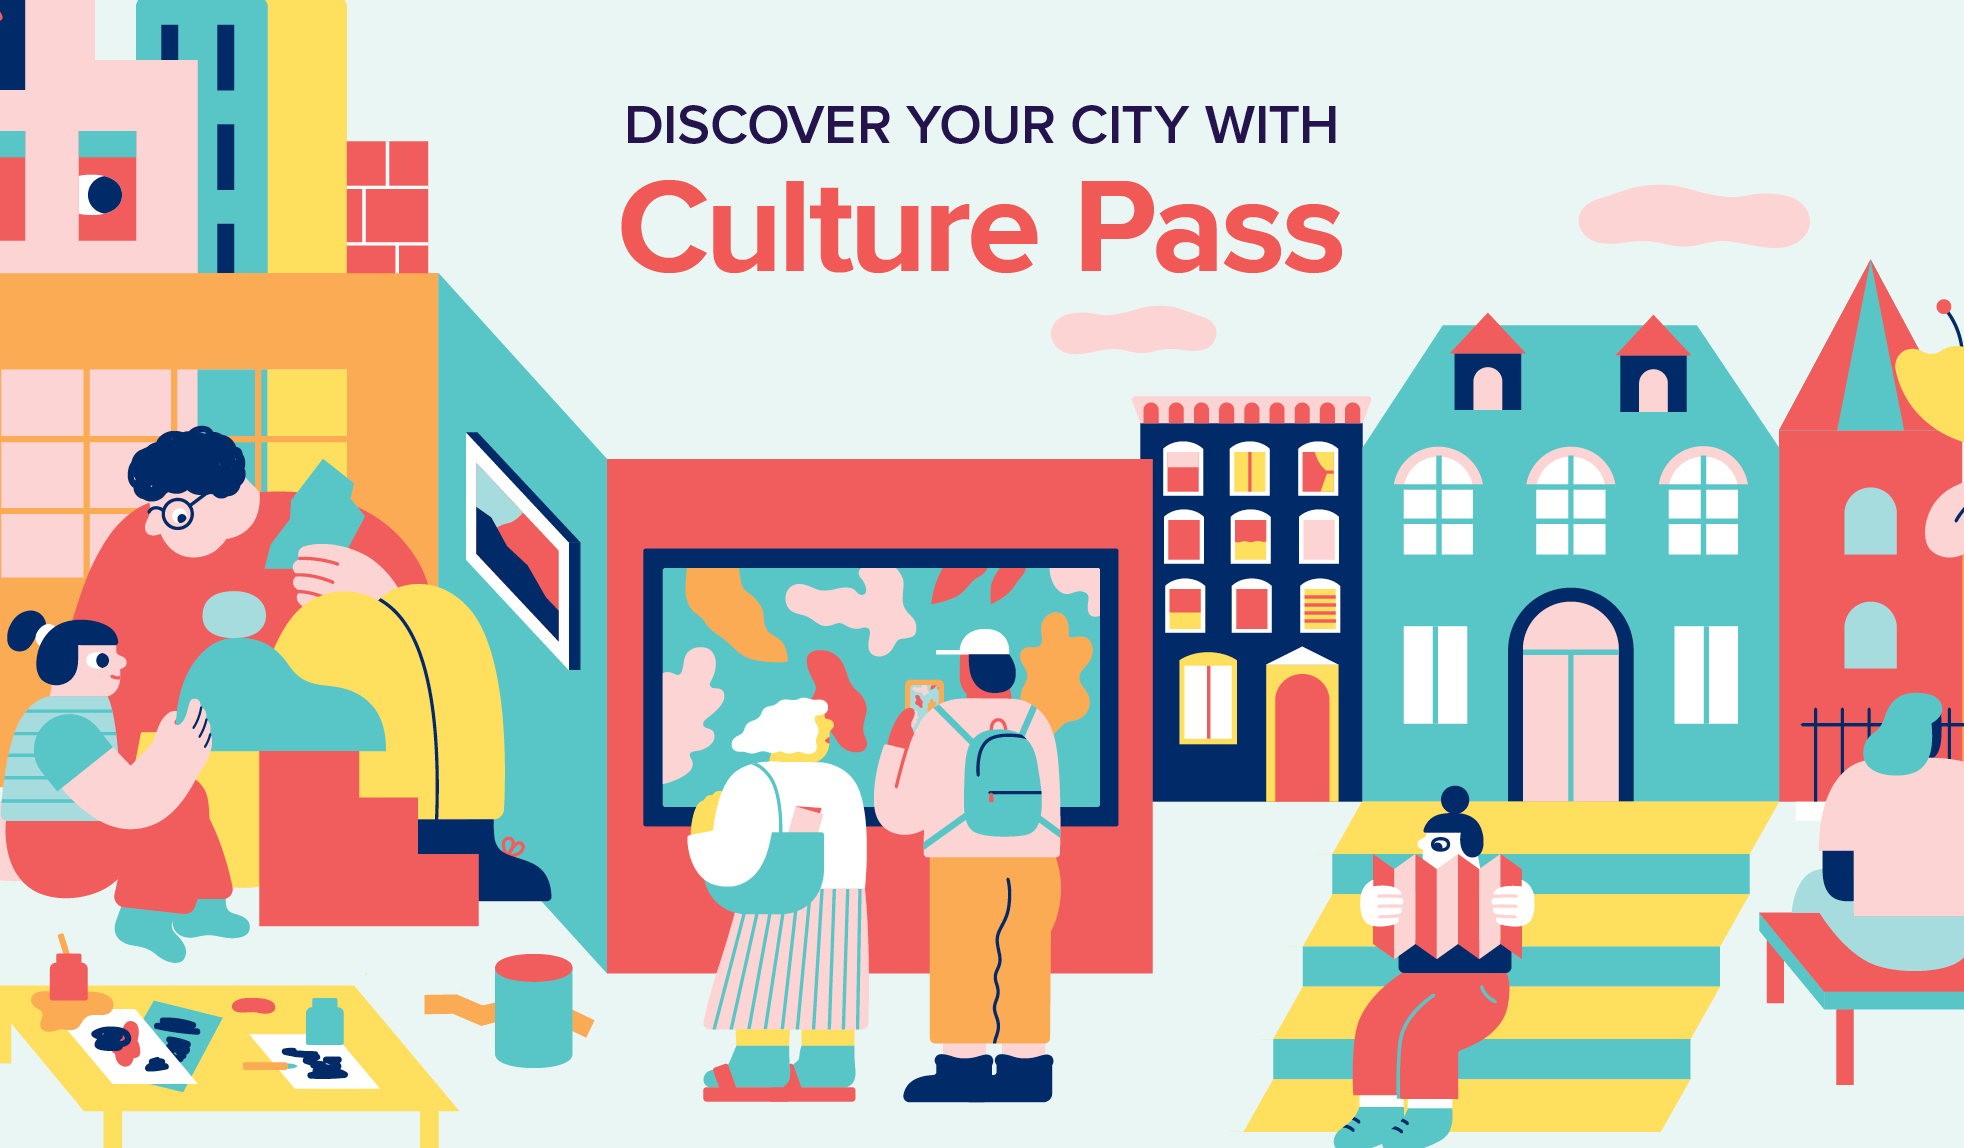 Use your library card to get your FREE passes to more than 90 museums, theaters, and more!